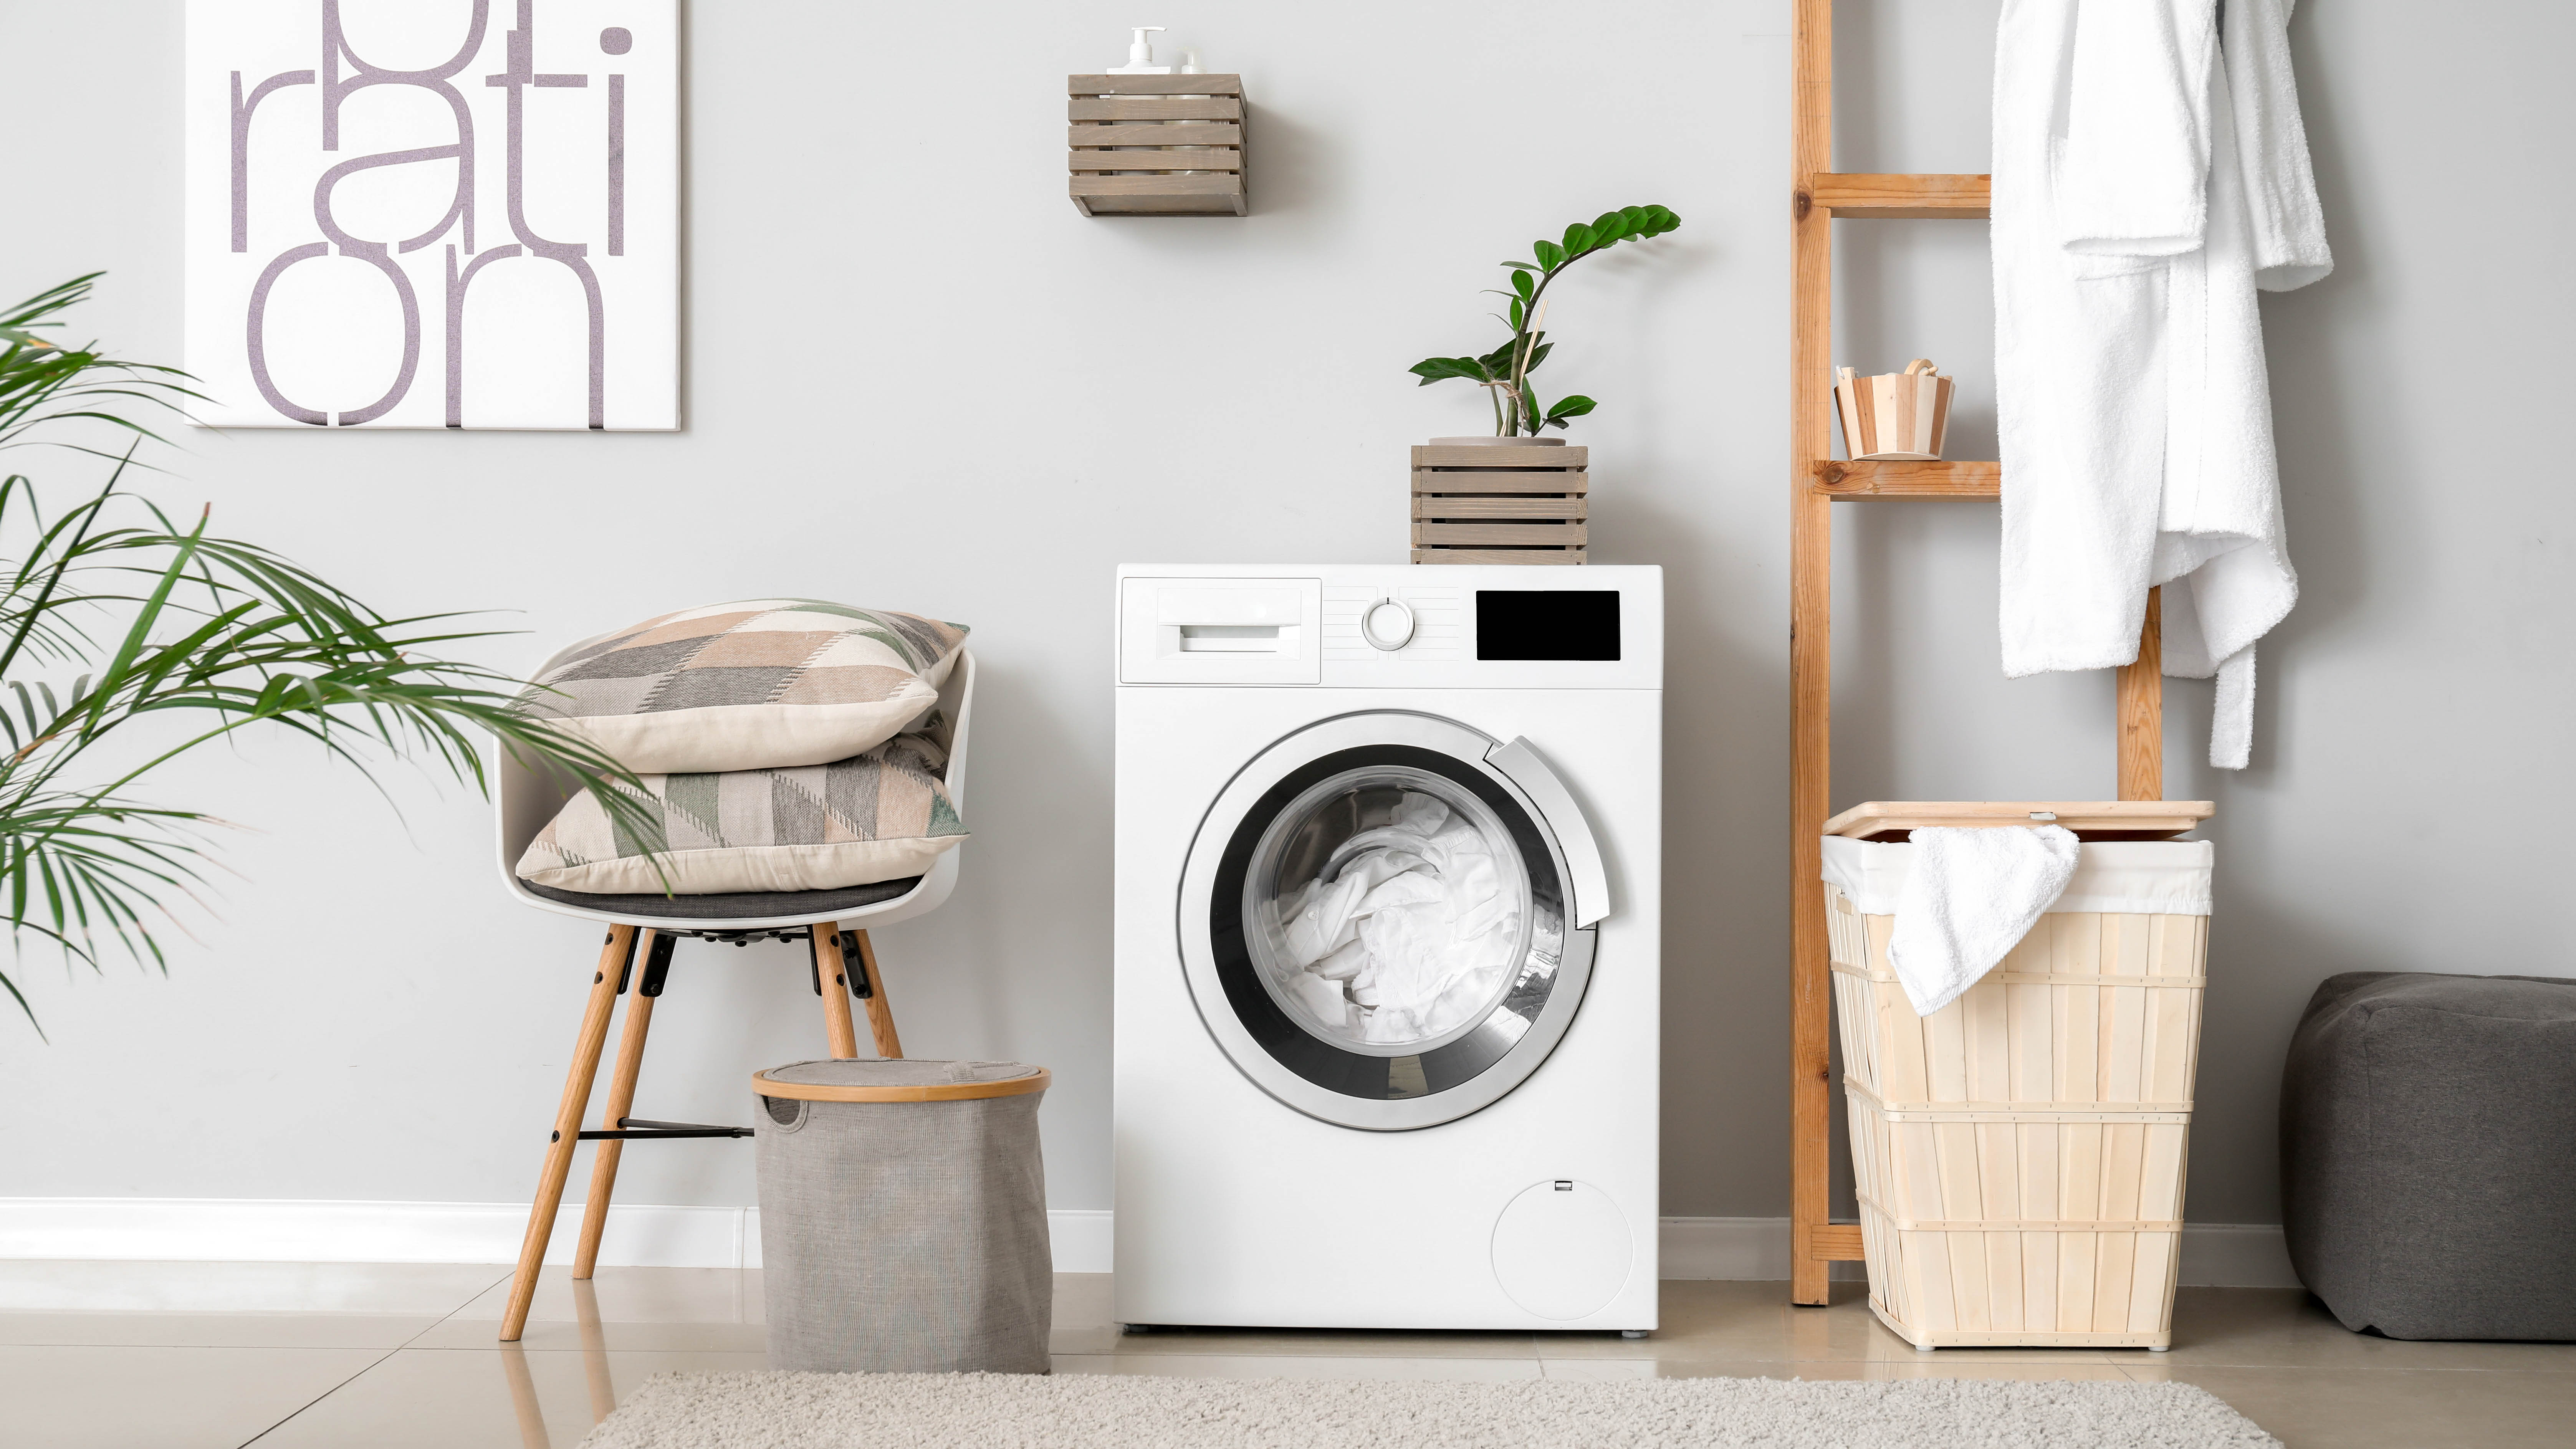 A laundry room with washing machine, laundry basket, chair, plant and shelves